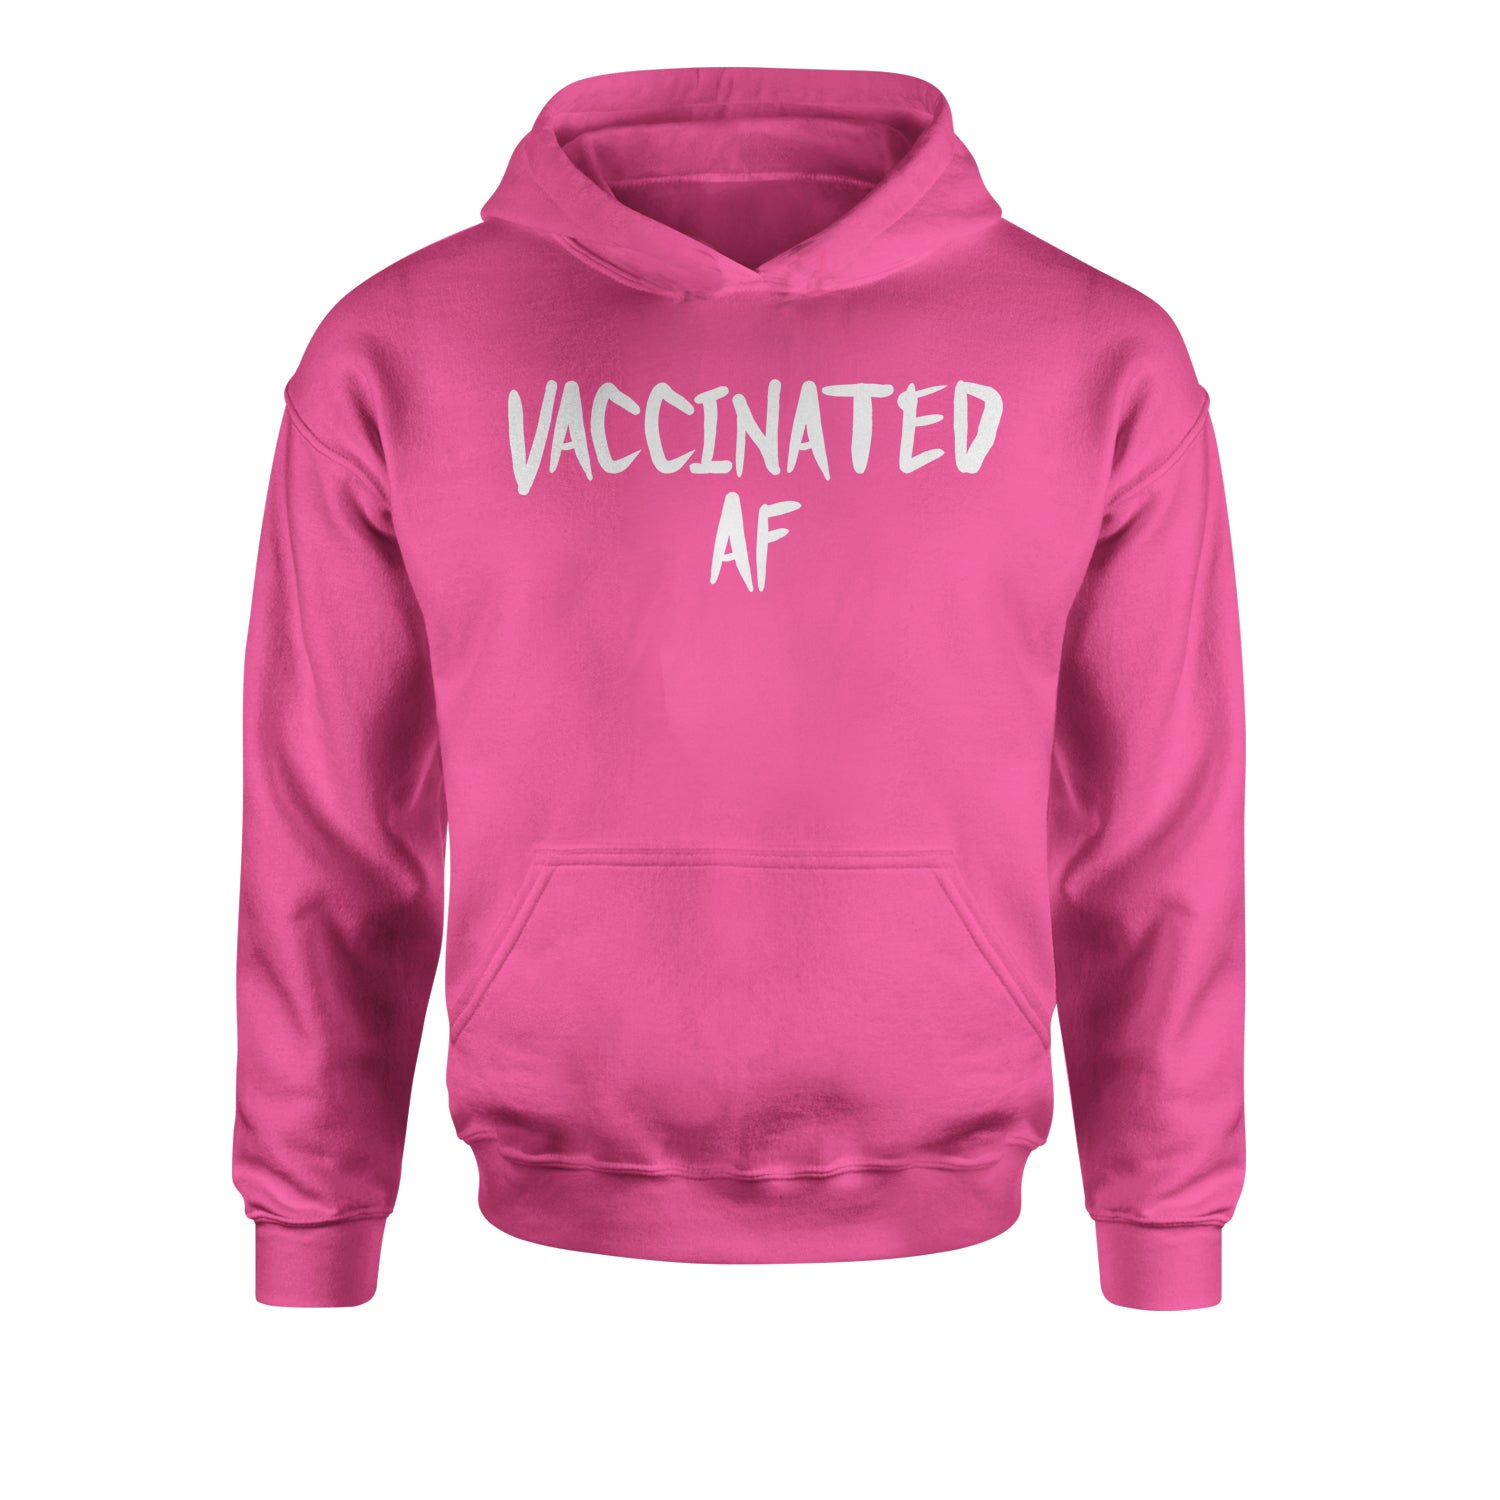 Vaccinated AF Pro Vaccine Funny Vaccination Health Youth-Sized Hoodie moderna, pfizer, vaccine, vax, vaxx by Expression Tees